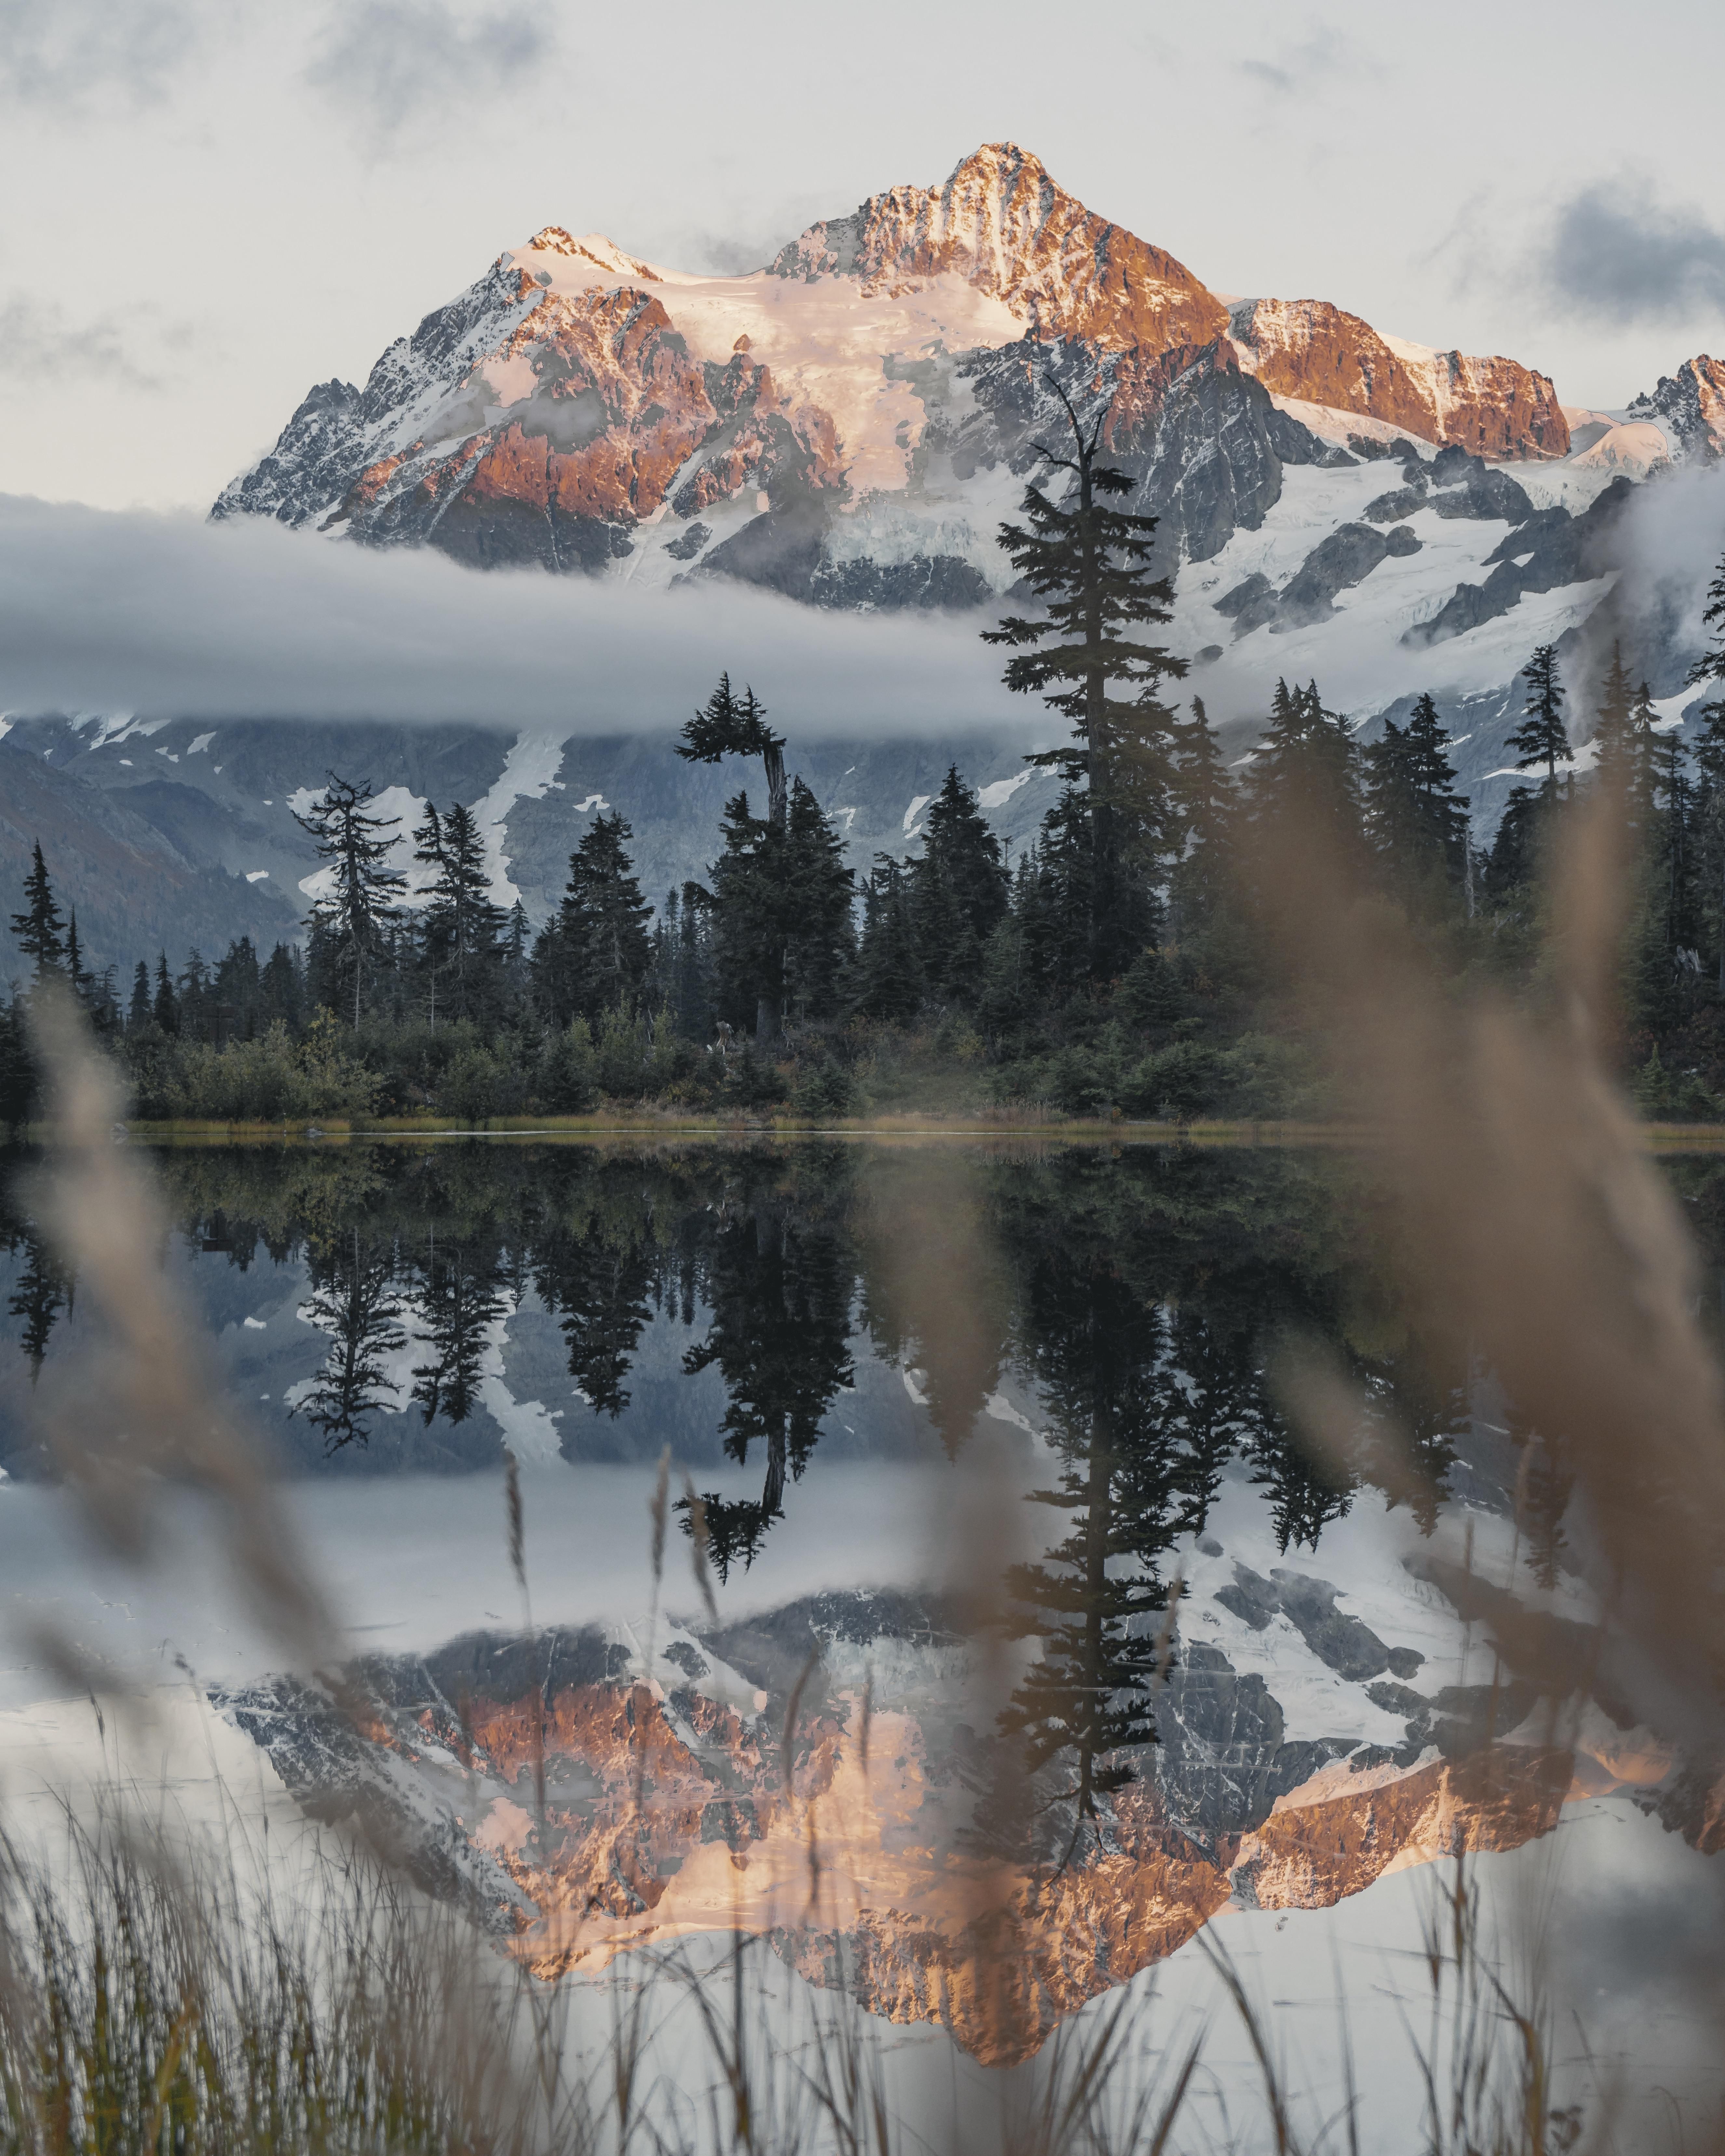 Mt. Shuksan reflecting in picture lake. This is definitely one